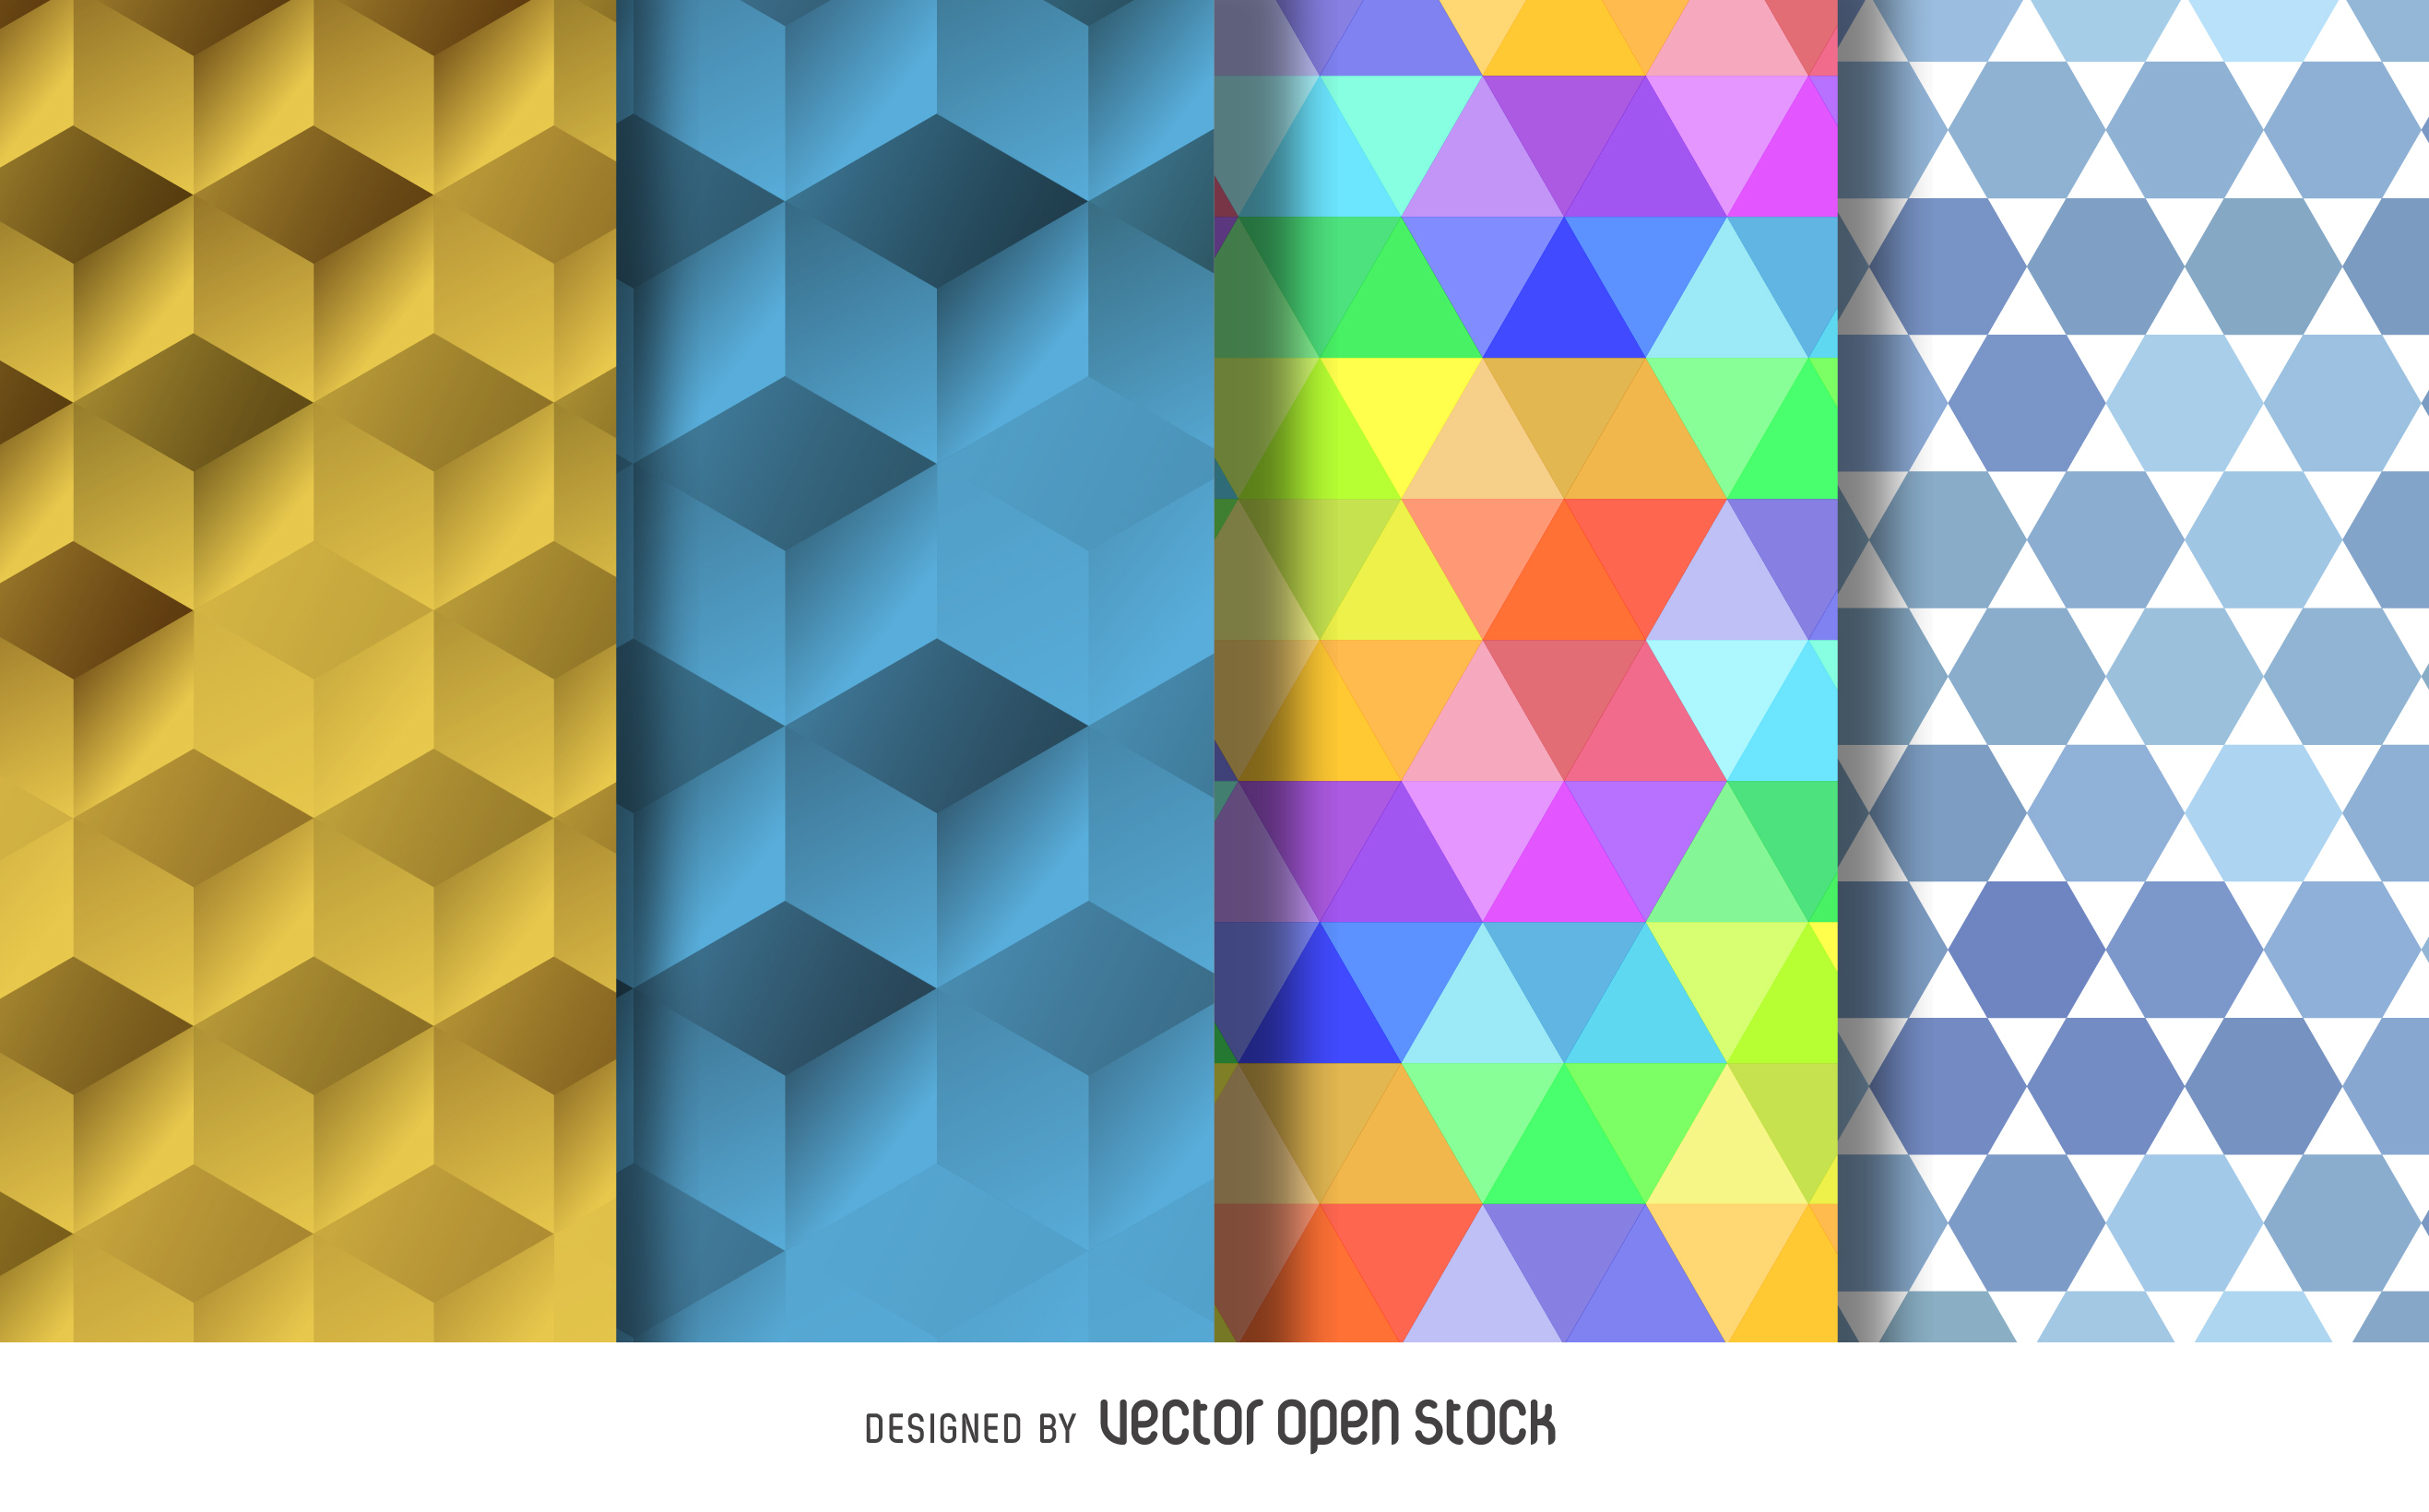 Abstract Blue polygons background - Vector download